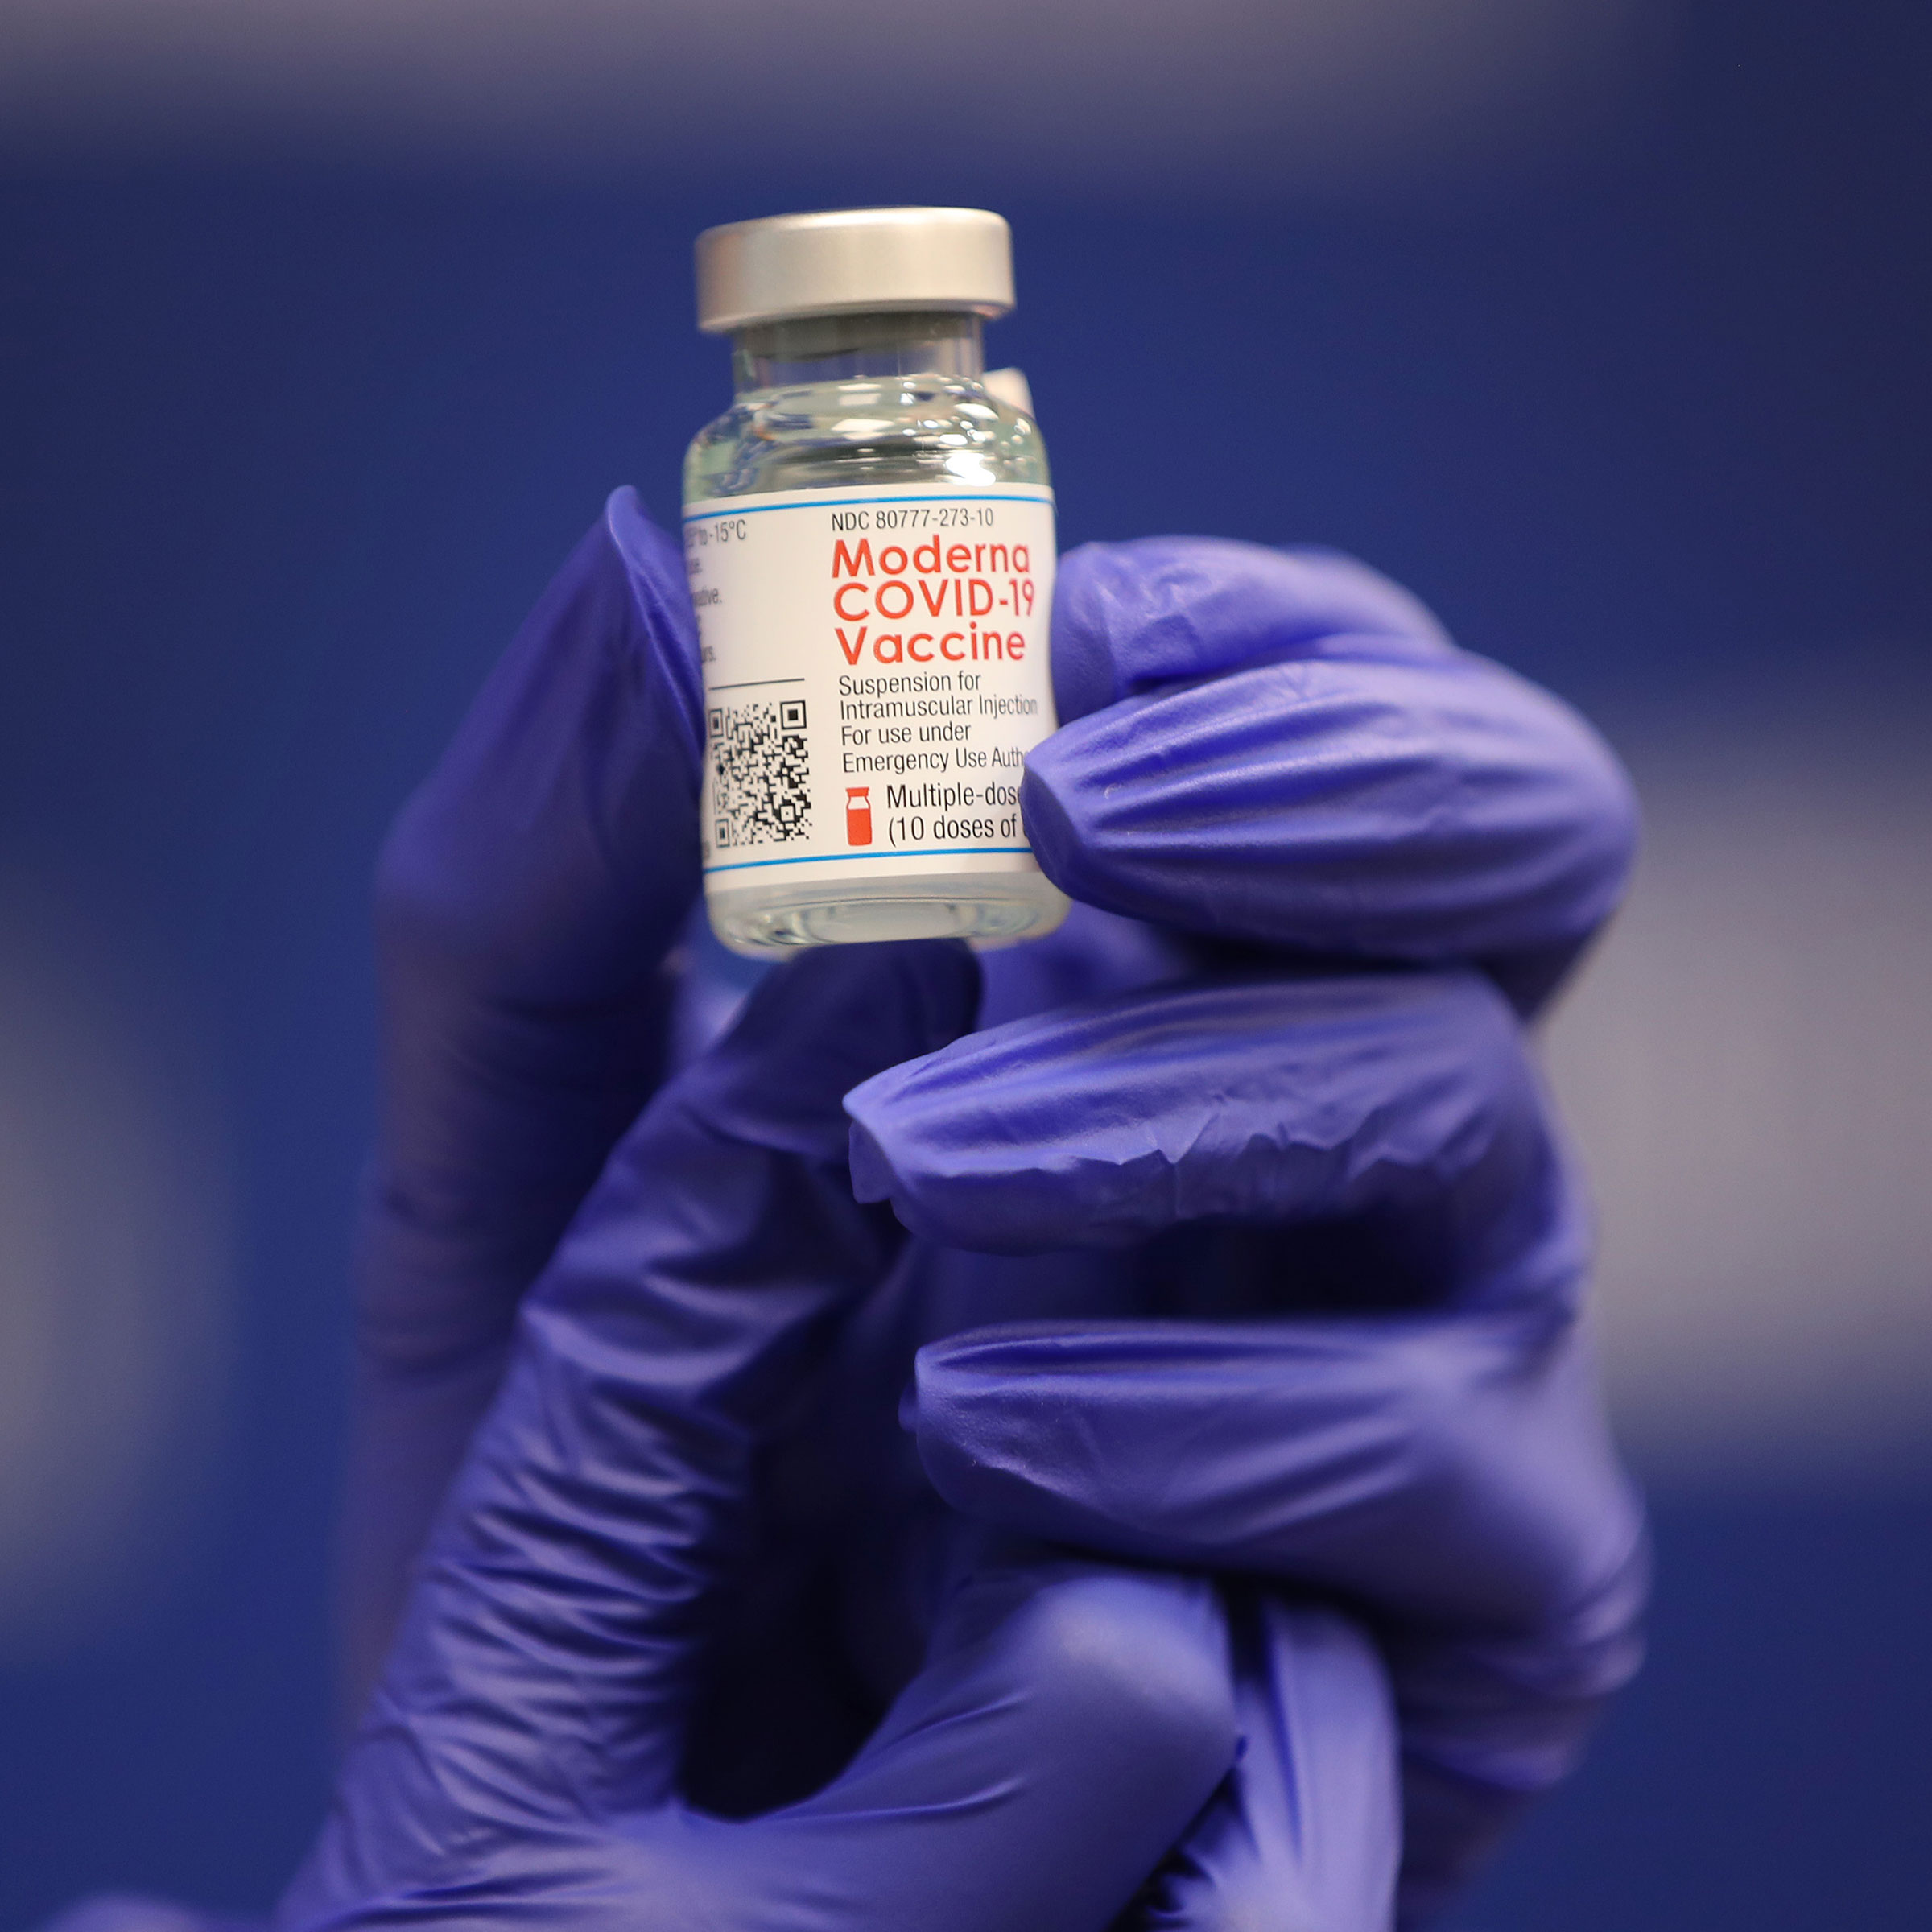 What to Know About the Moderna COVID-19 Vaccine | TIME